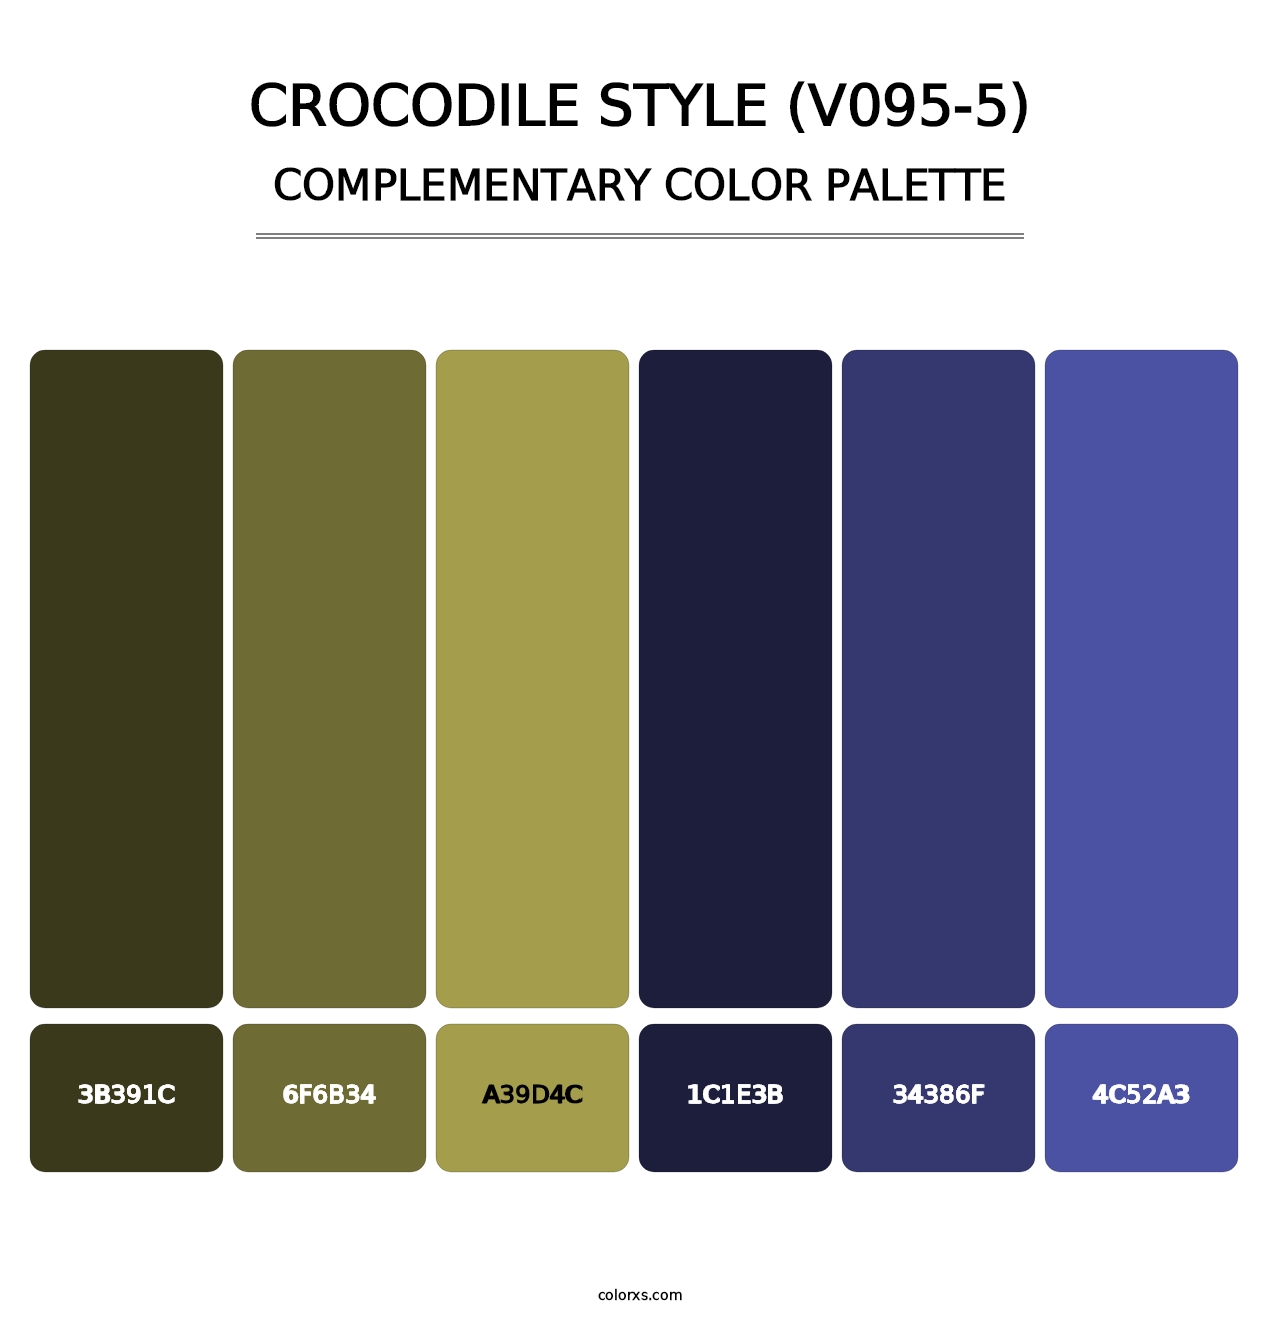 Crocodile Style (V095-5) - Complementary Color Palette